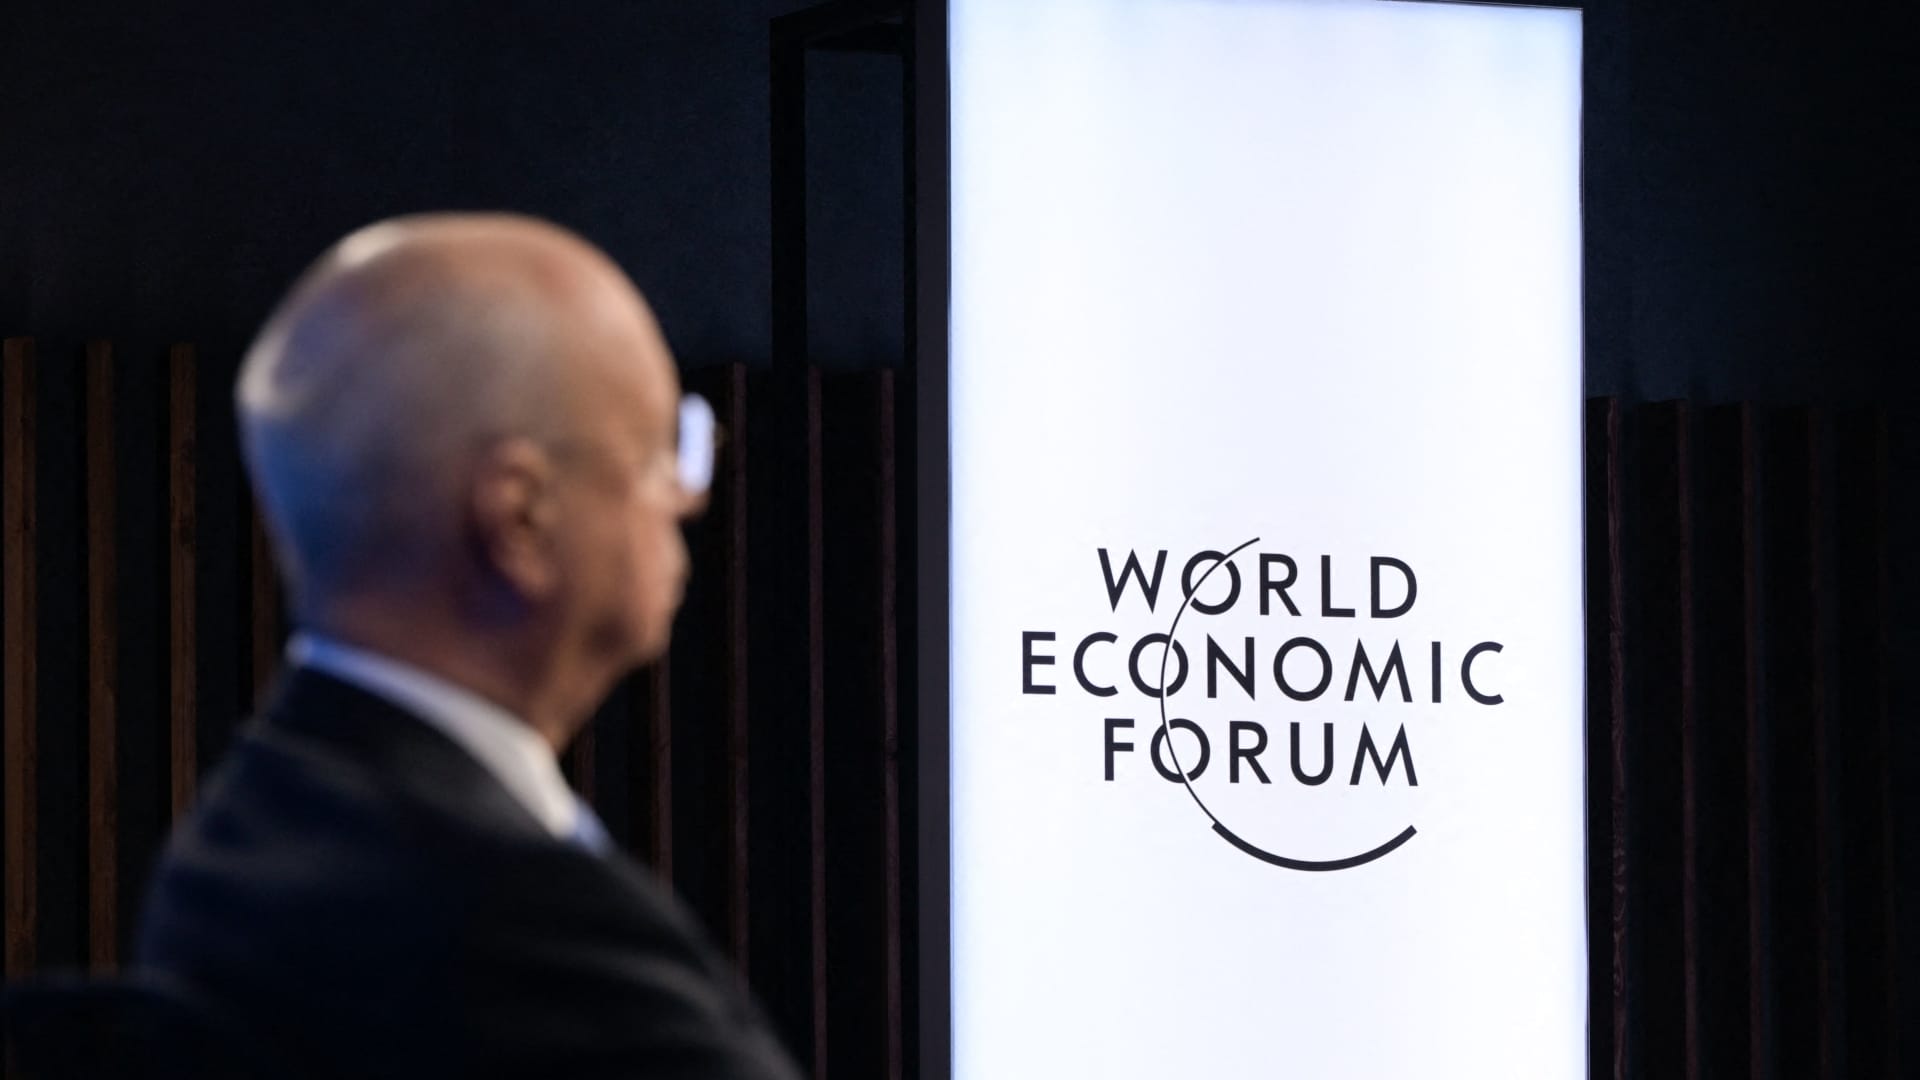 The World Economic Forum (WEF) is returning to Davos in May, after cancelling previous meetings because of the pandemic. However, there are a lot of Covid measures in place.